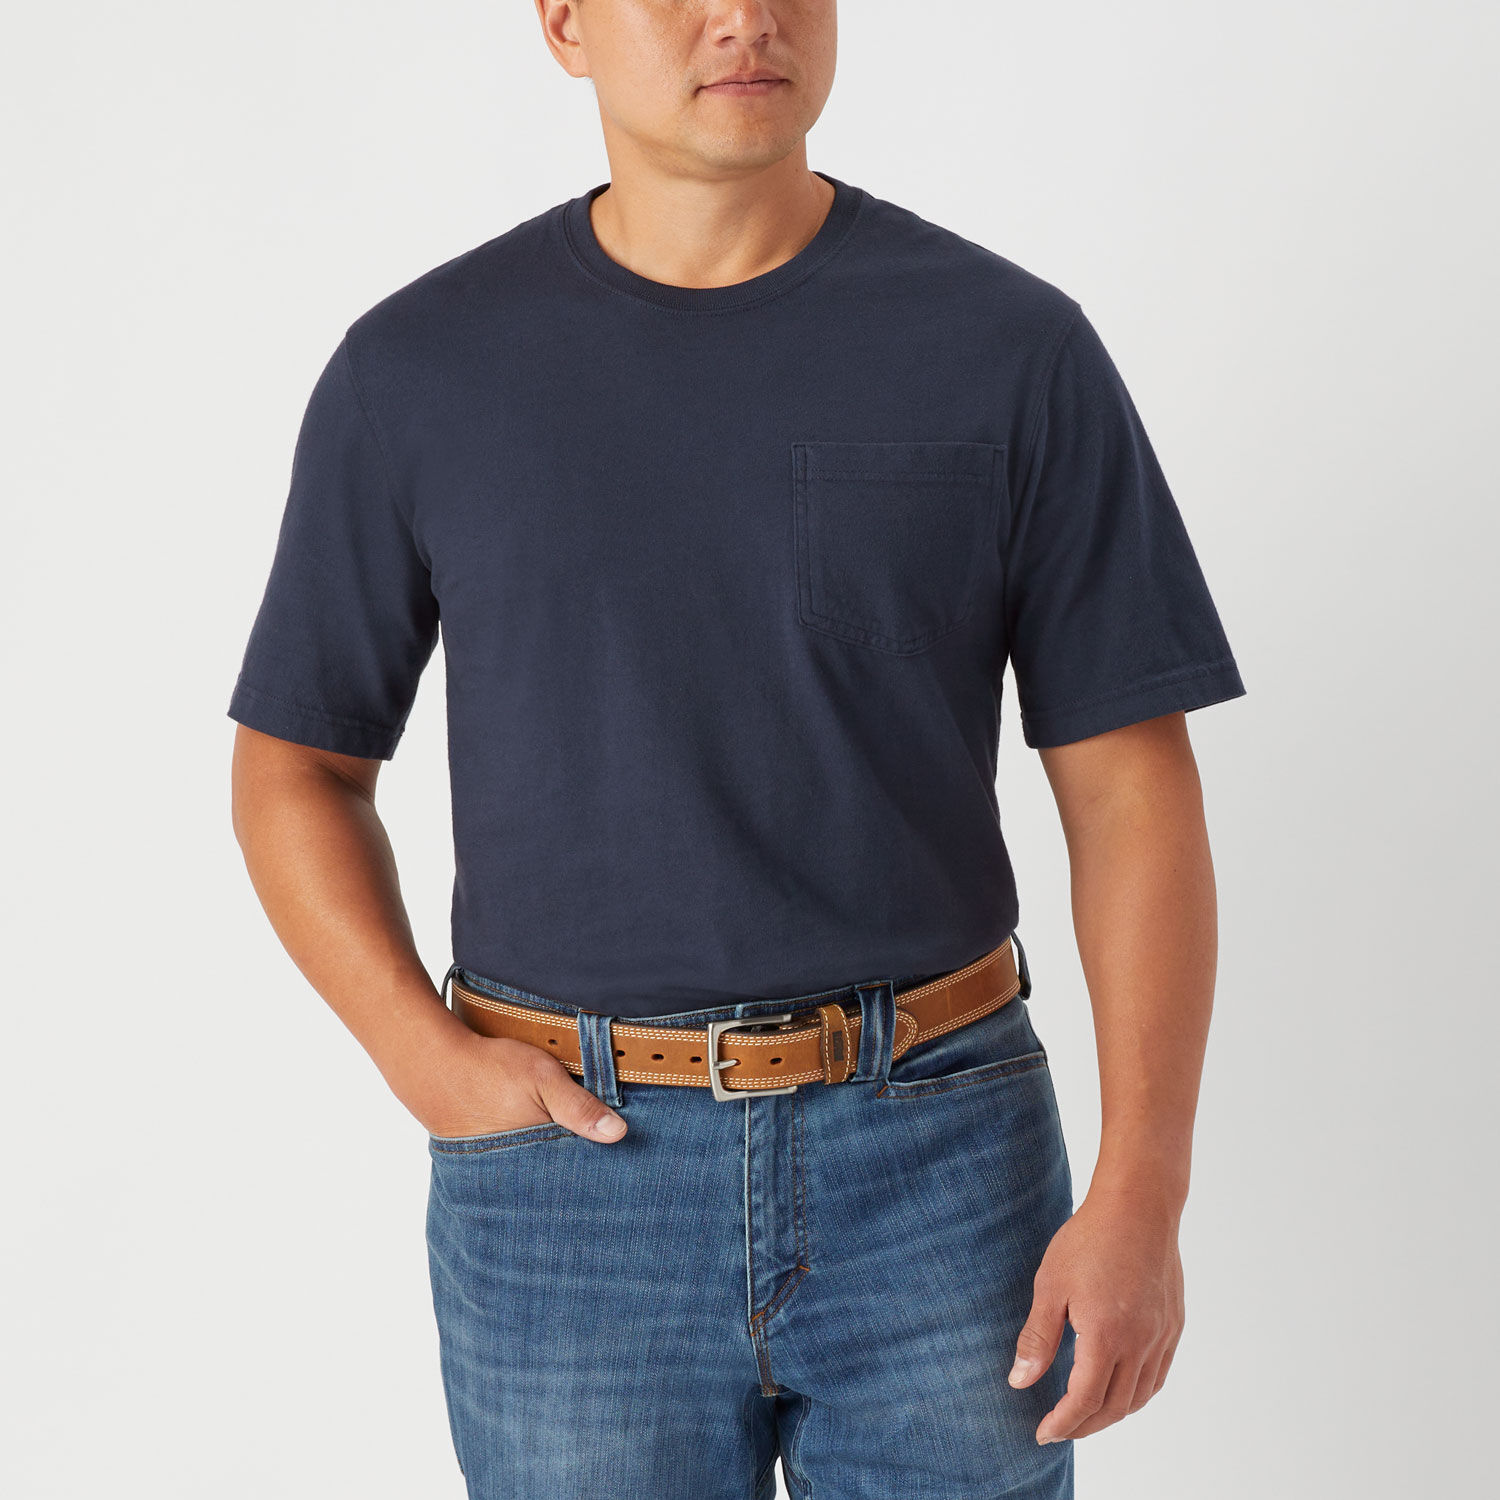 Men's Longtail T Slim Fit T-Shirt with Pocket | Duluth Trading Company